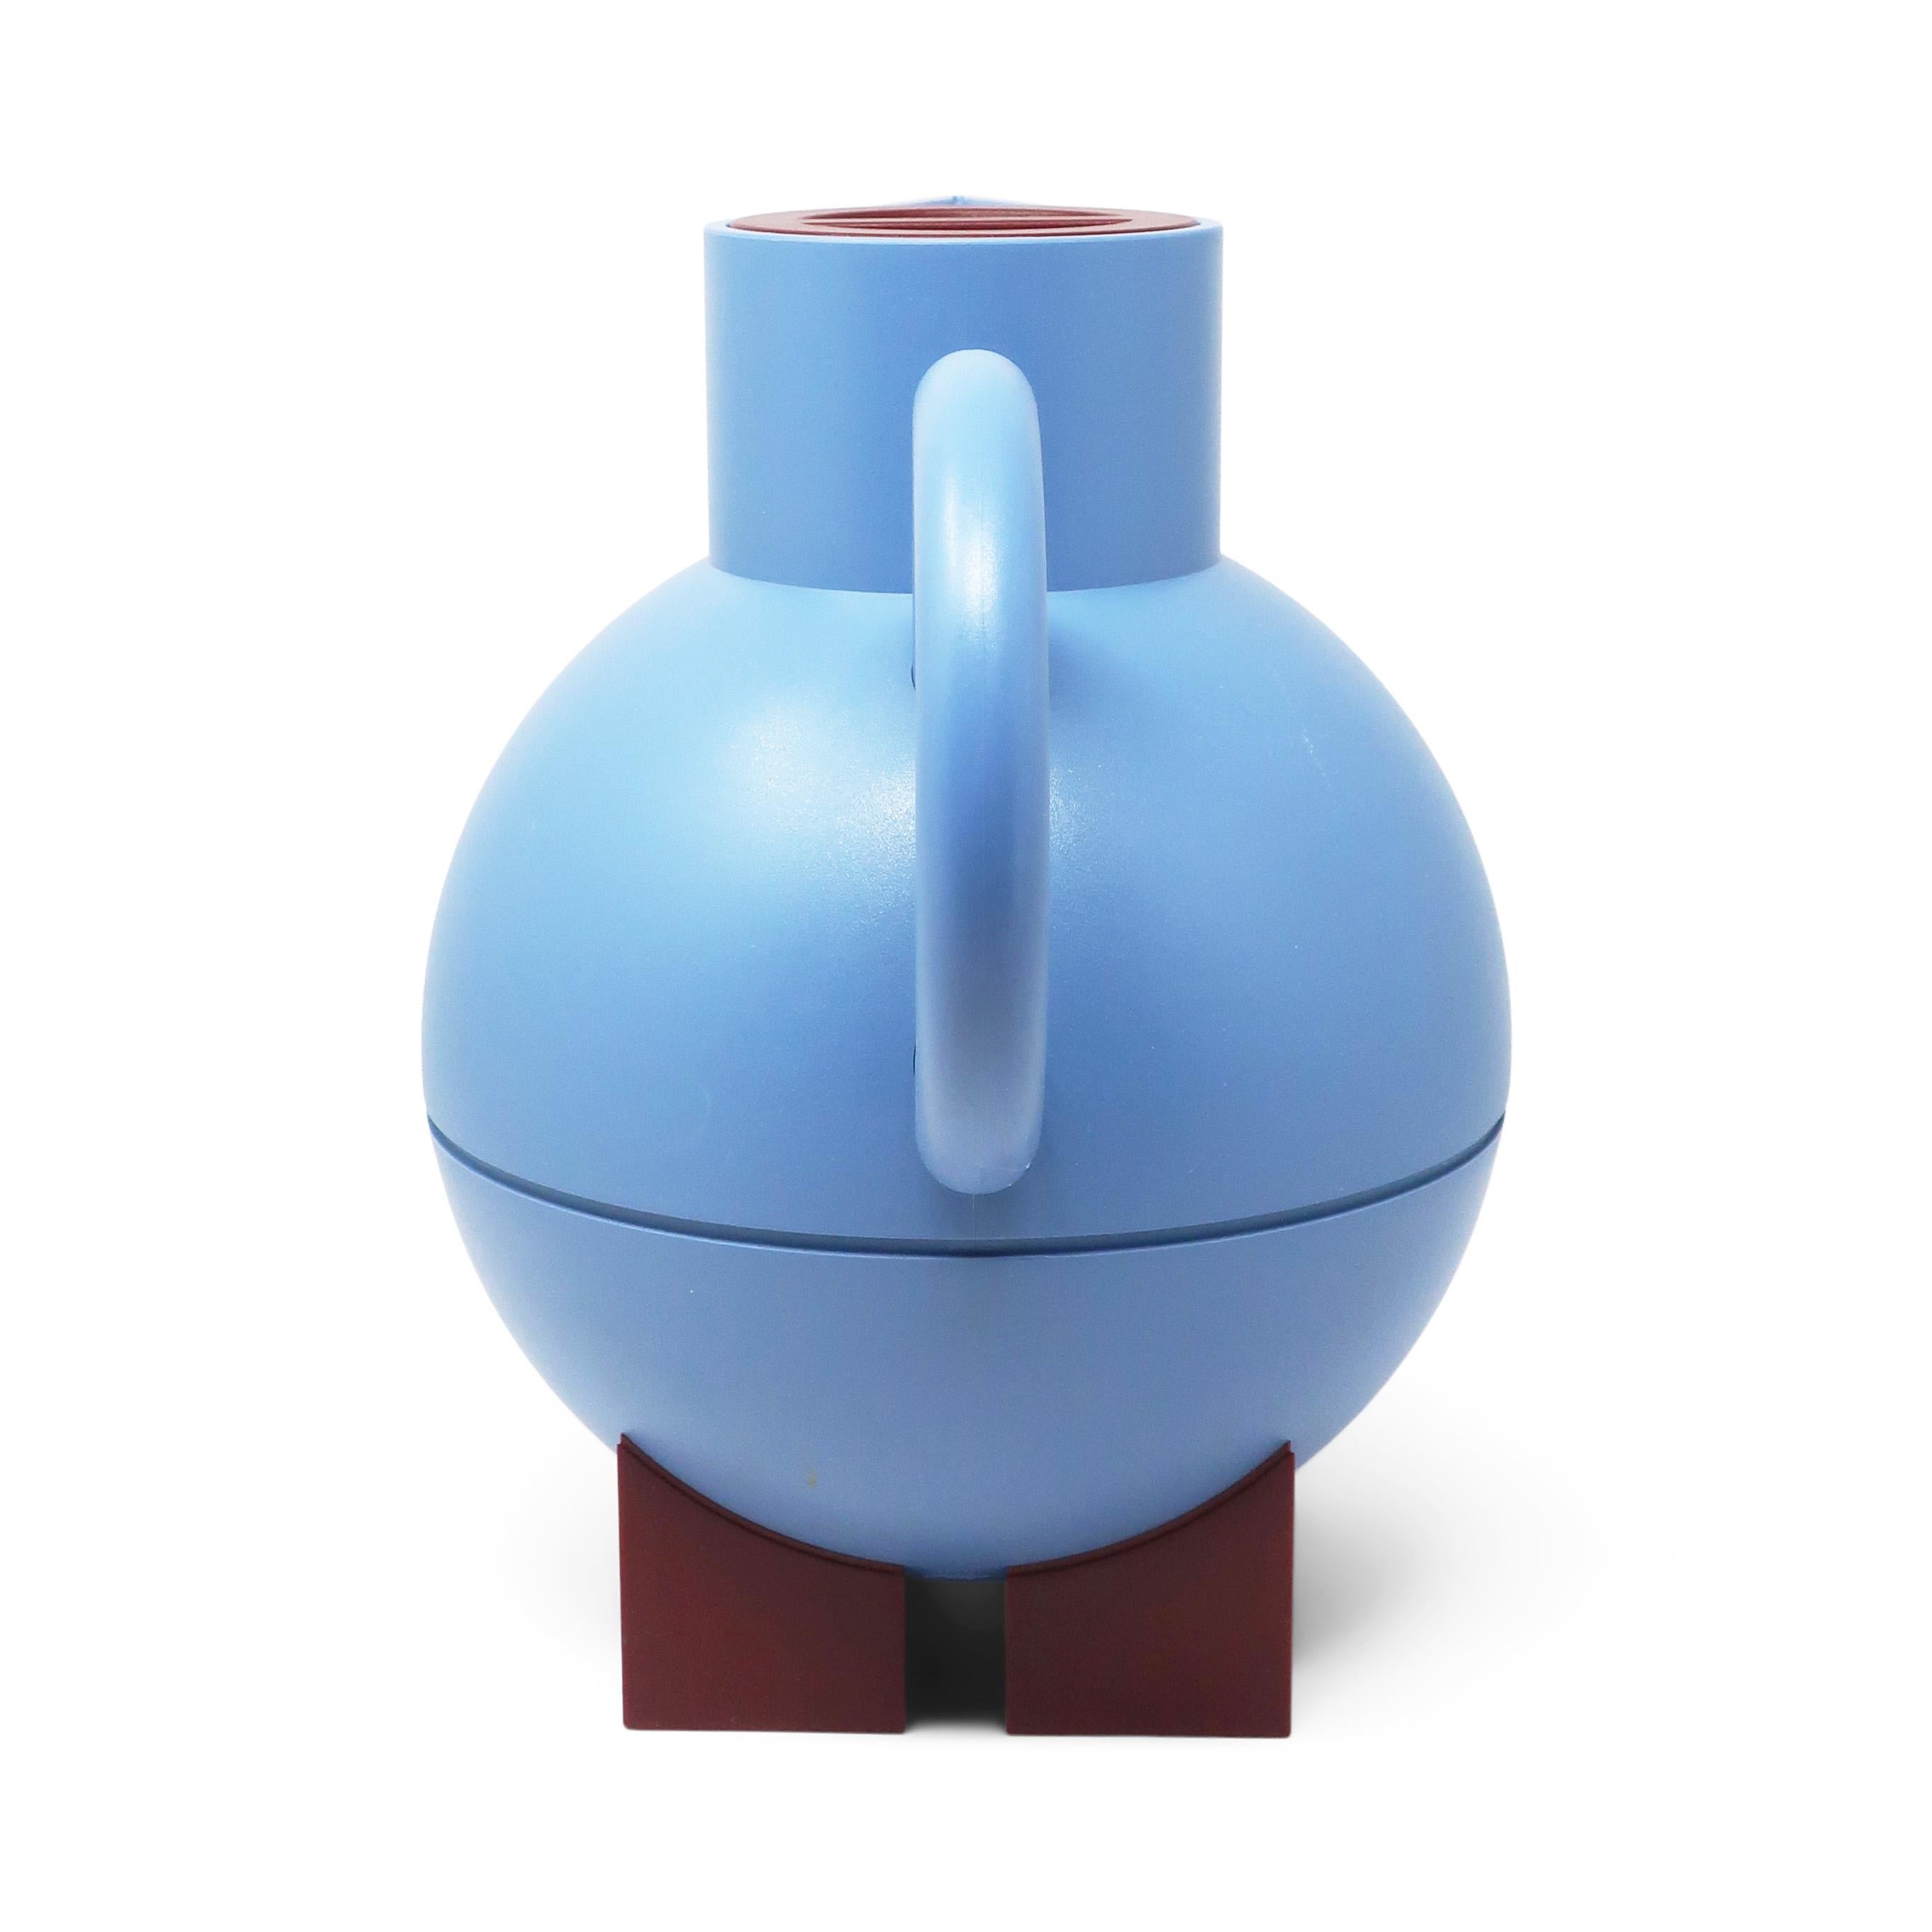 20th Century Postmodern Blue Euclid Thermos by Michael Graves for Alessi